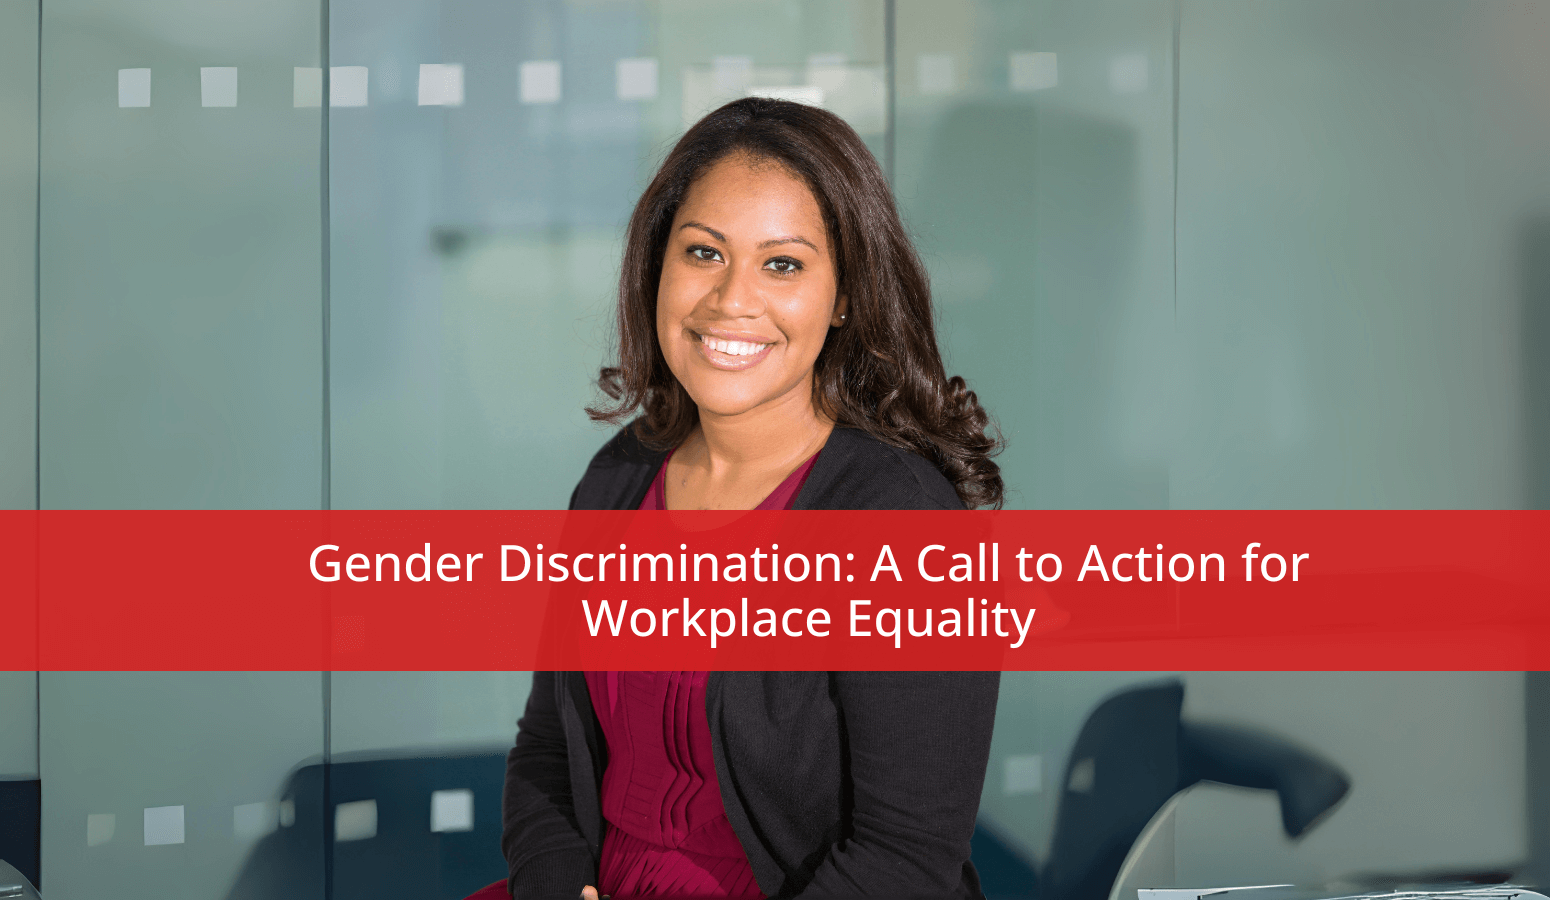 Featured image for “Gender Discrimination: A Call to Action for Workplace Equality”